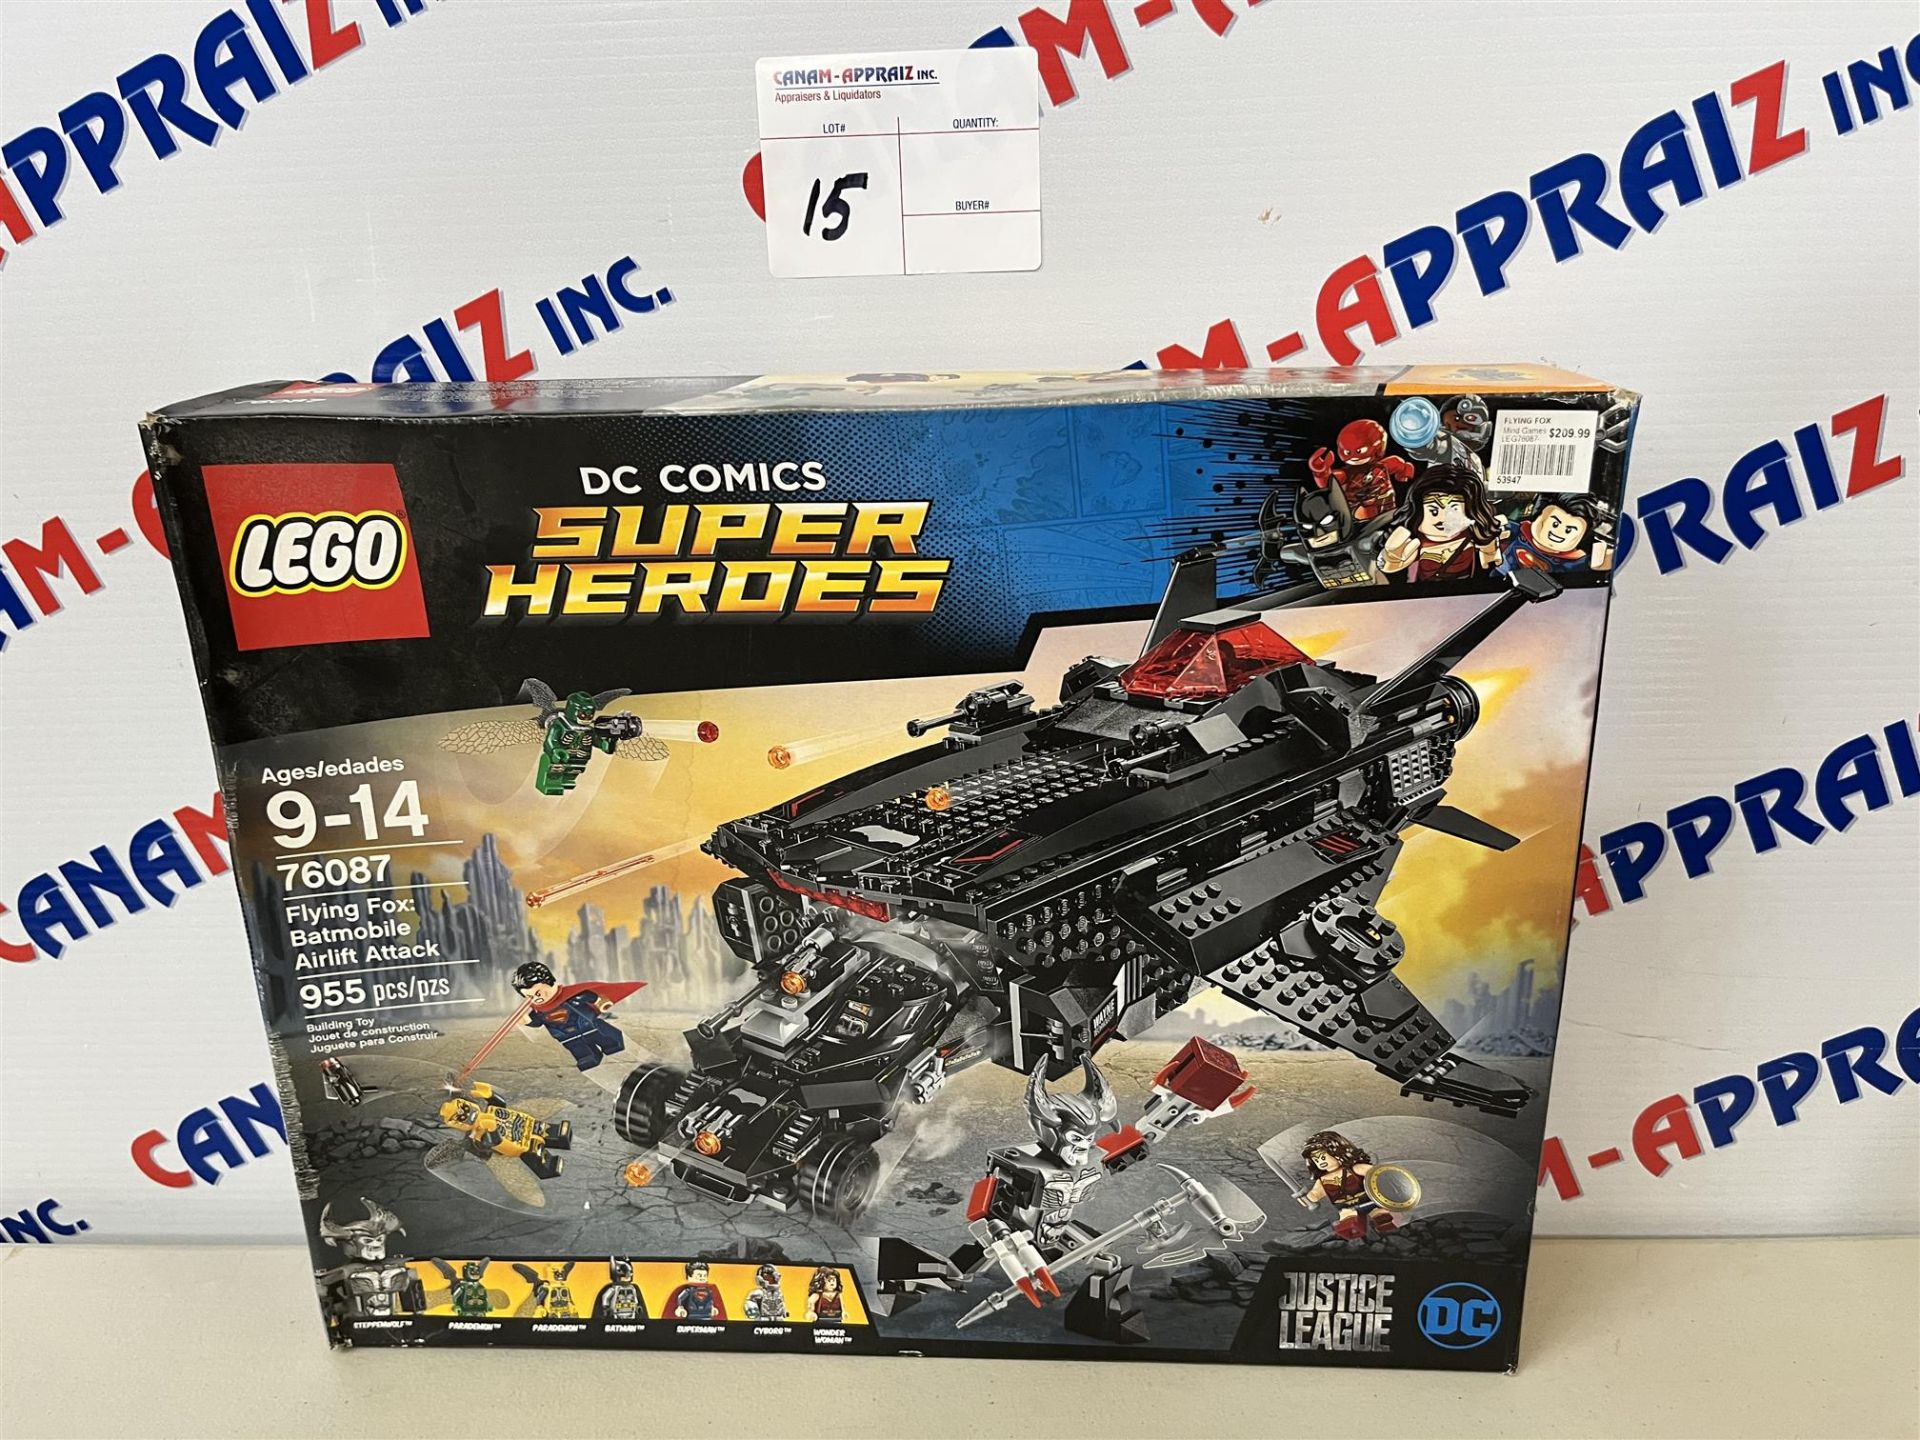 LEGO - 76087, 955 pcs - Flying Fox: Batmobile Airlift Attack - Image 2 of 3